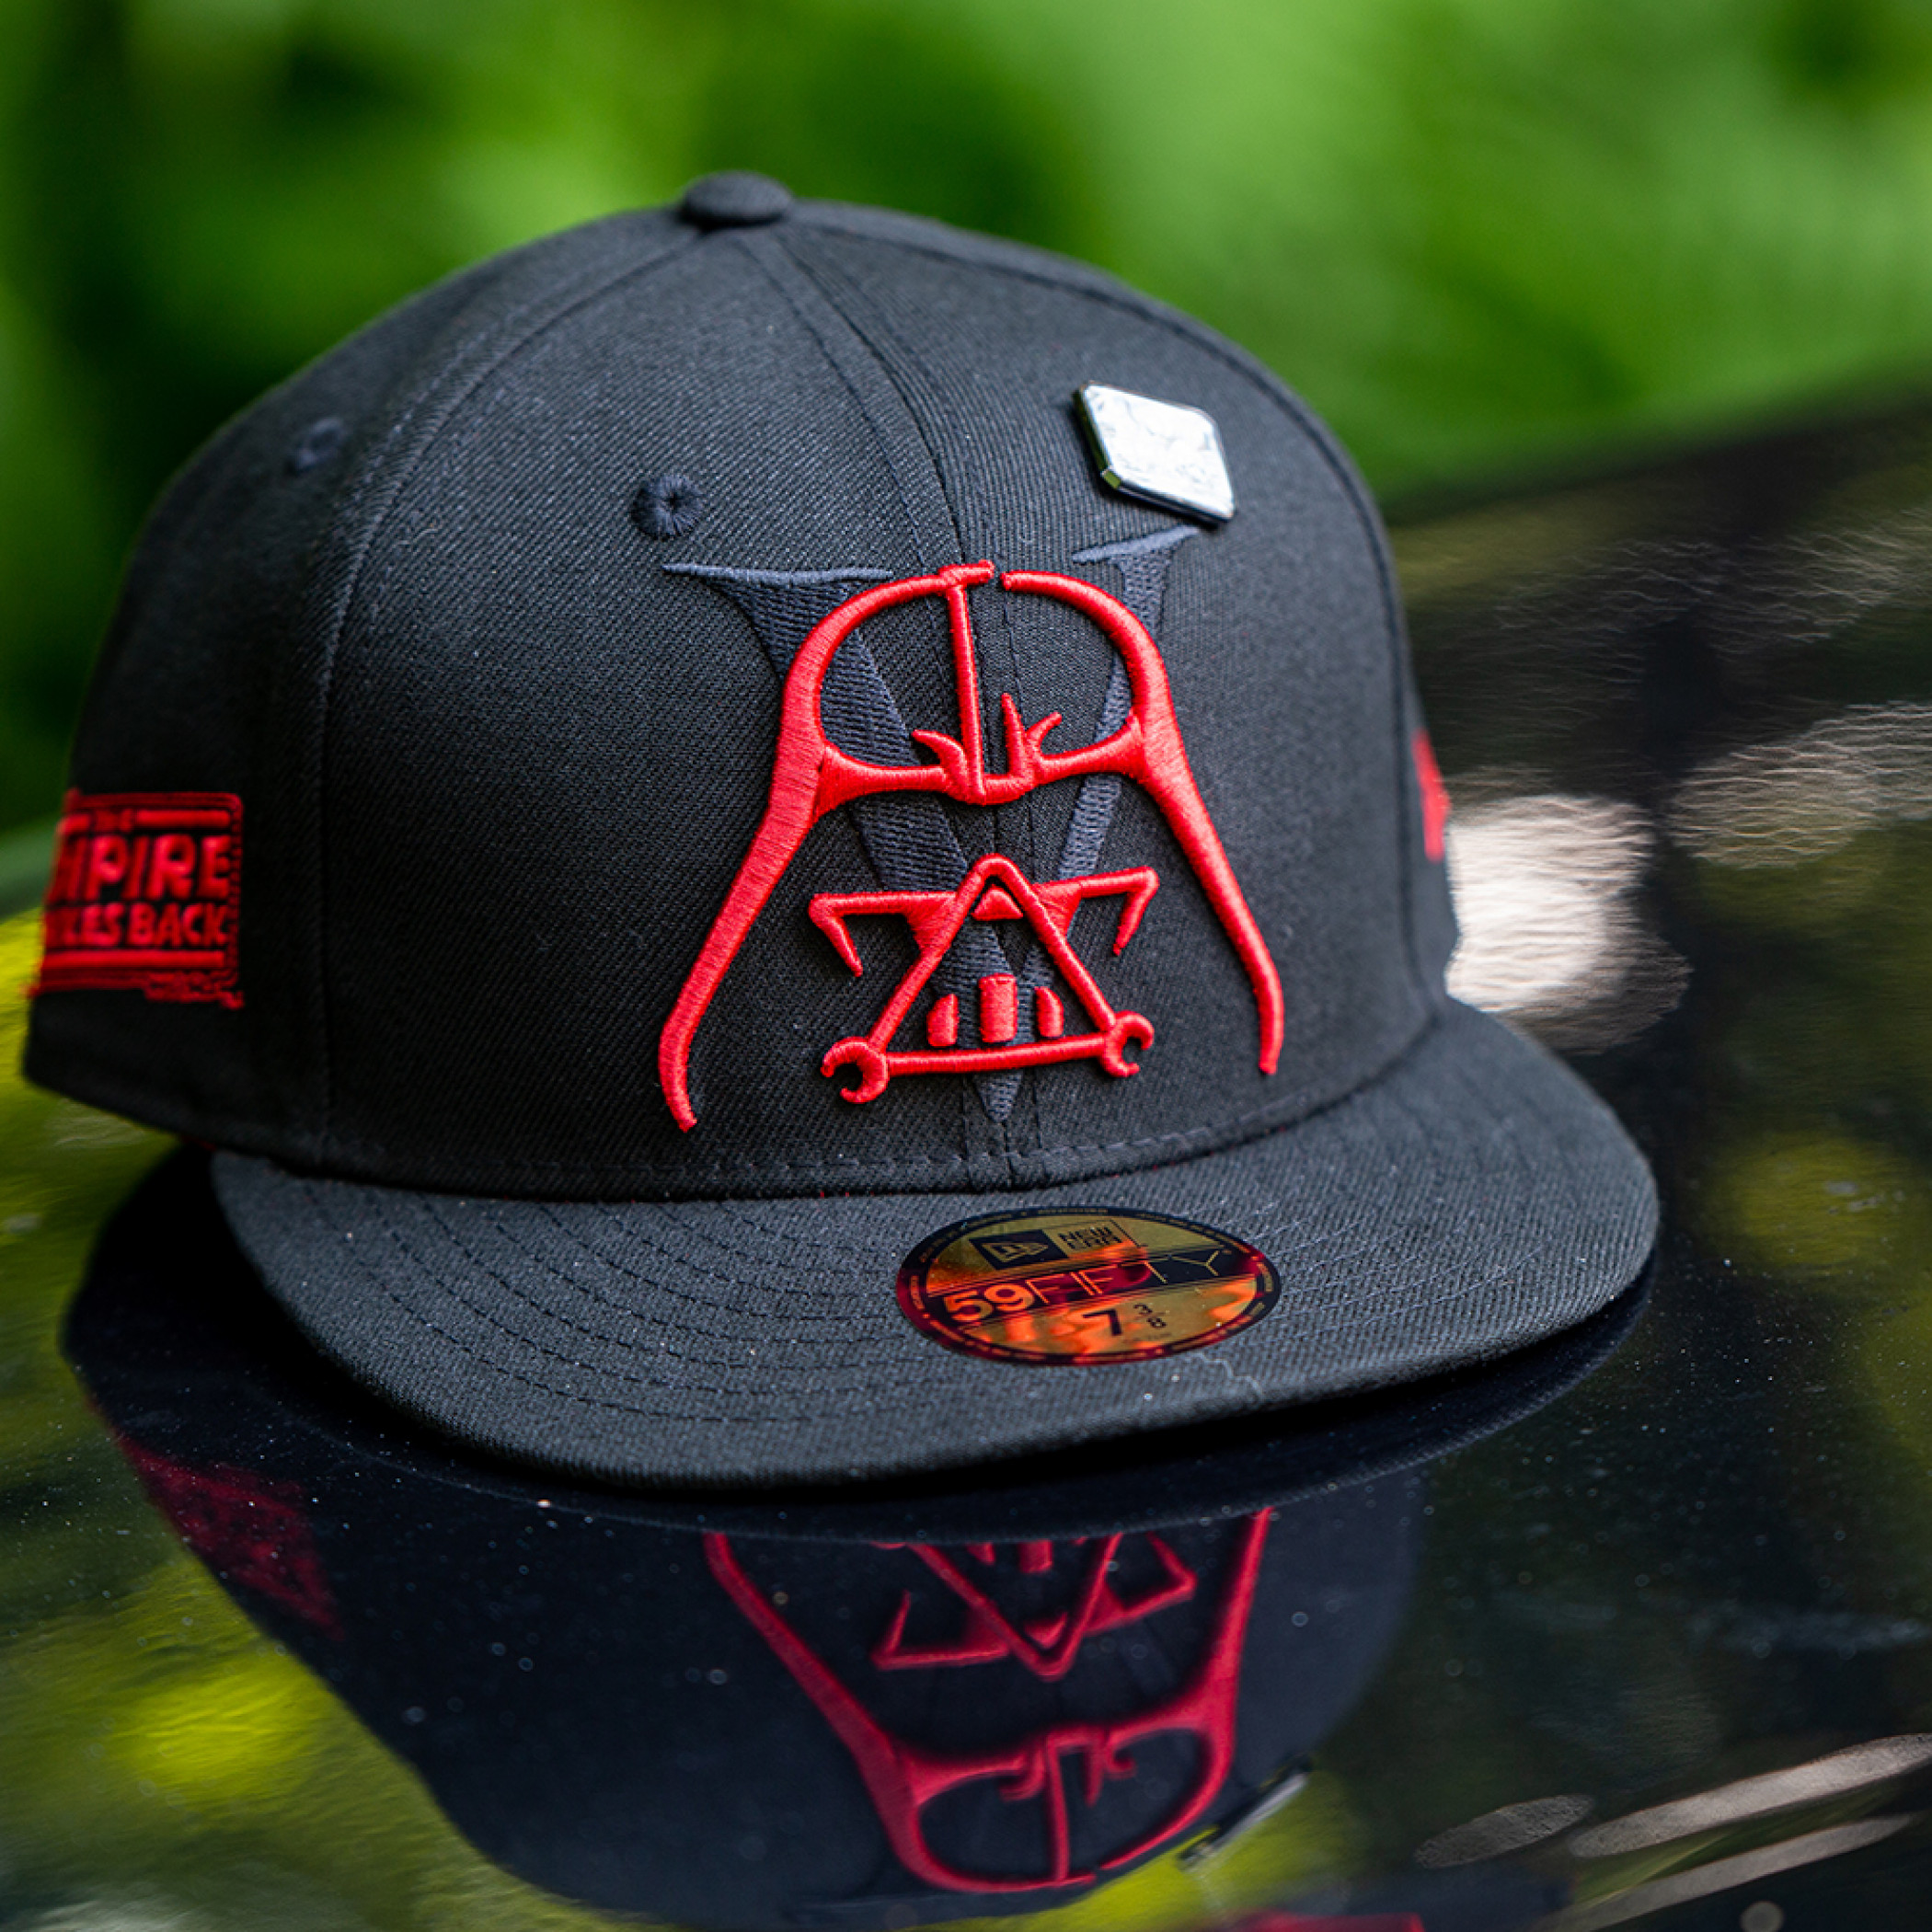 New Era Star Wars Episode V 5 Grey Snapback Cap 9 fifty Limited Exclusive Edition 